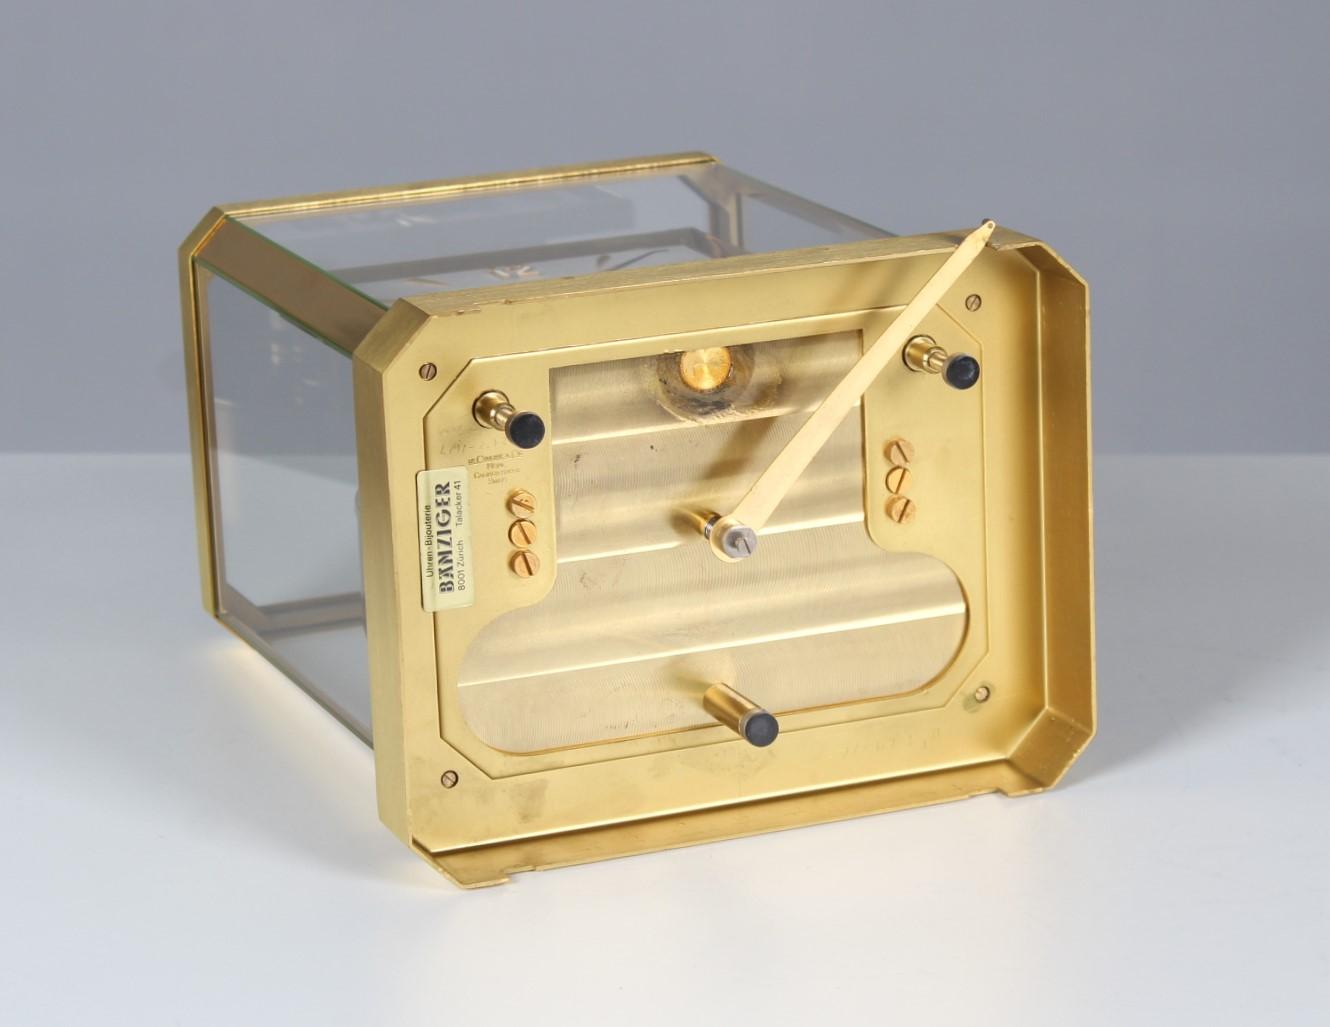 Manufactured 1962 Jaeger Lecoultre Atmos Clock with Square Dial, Fullset 7